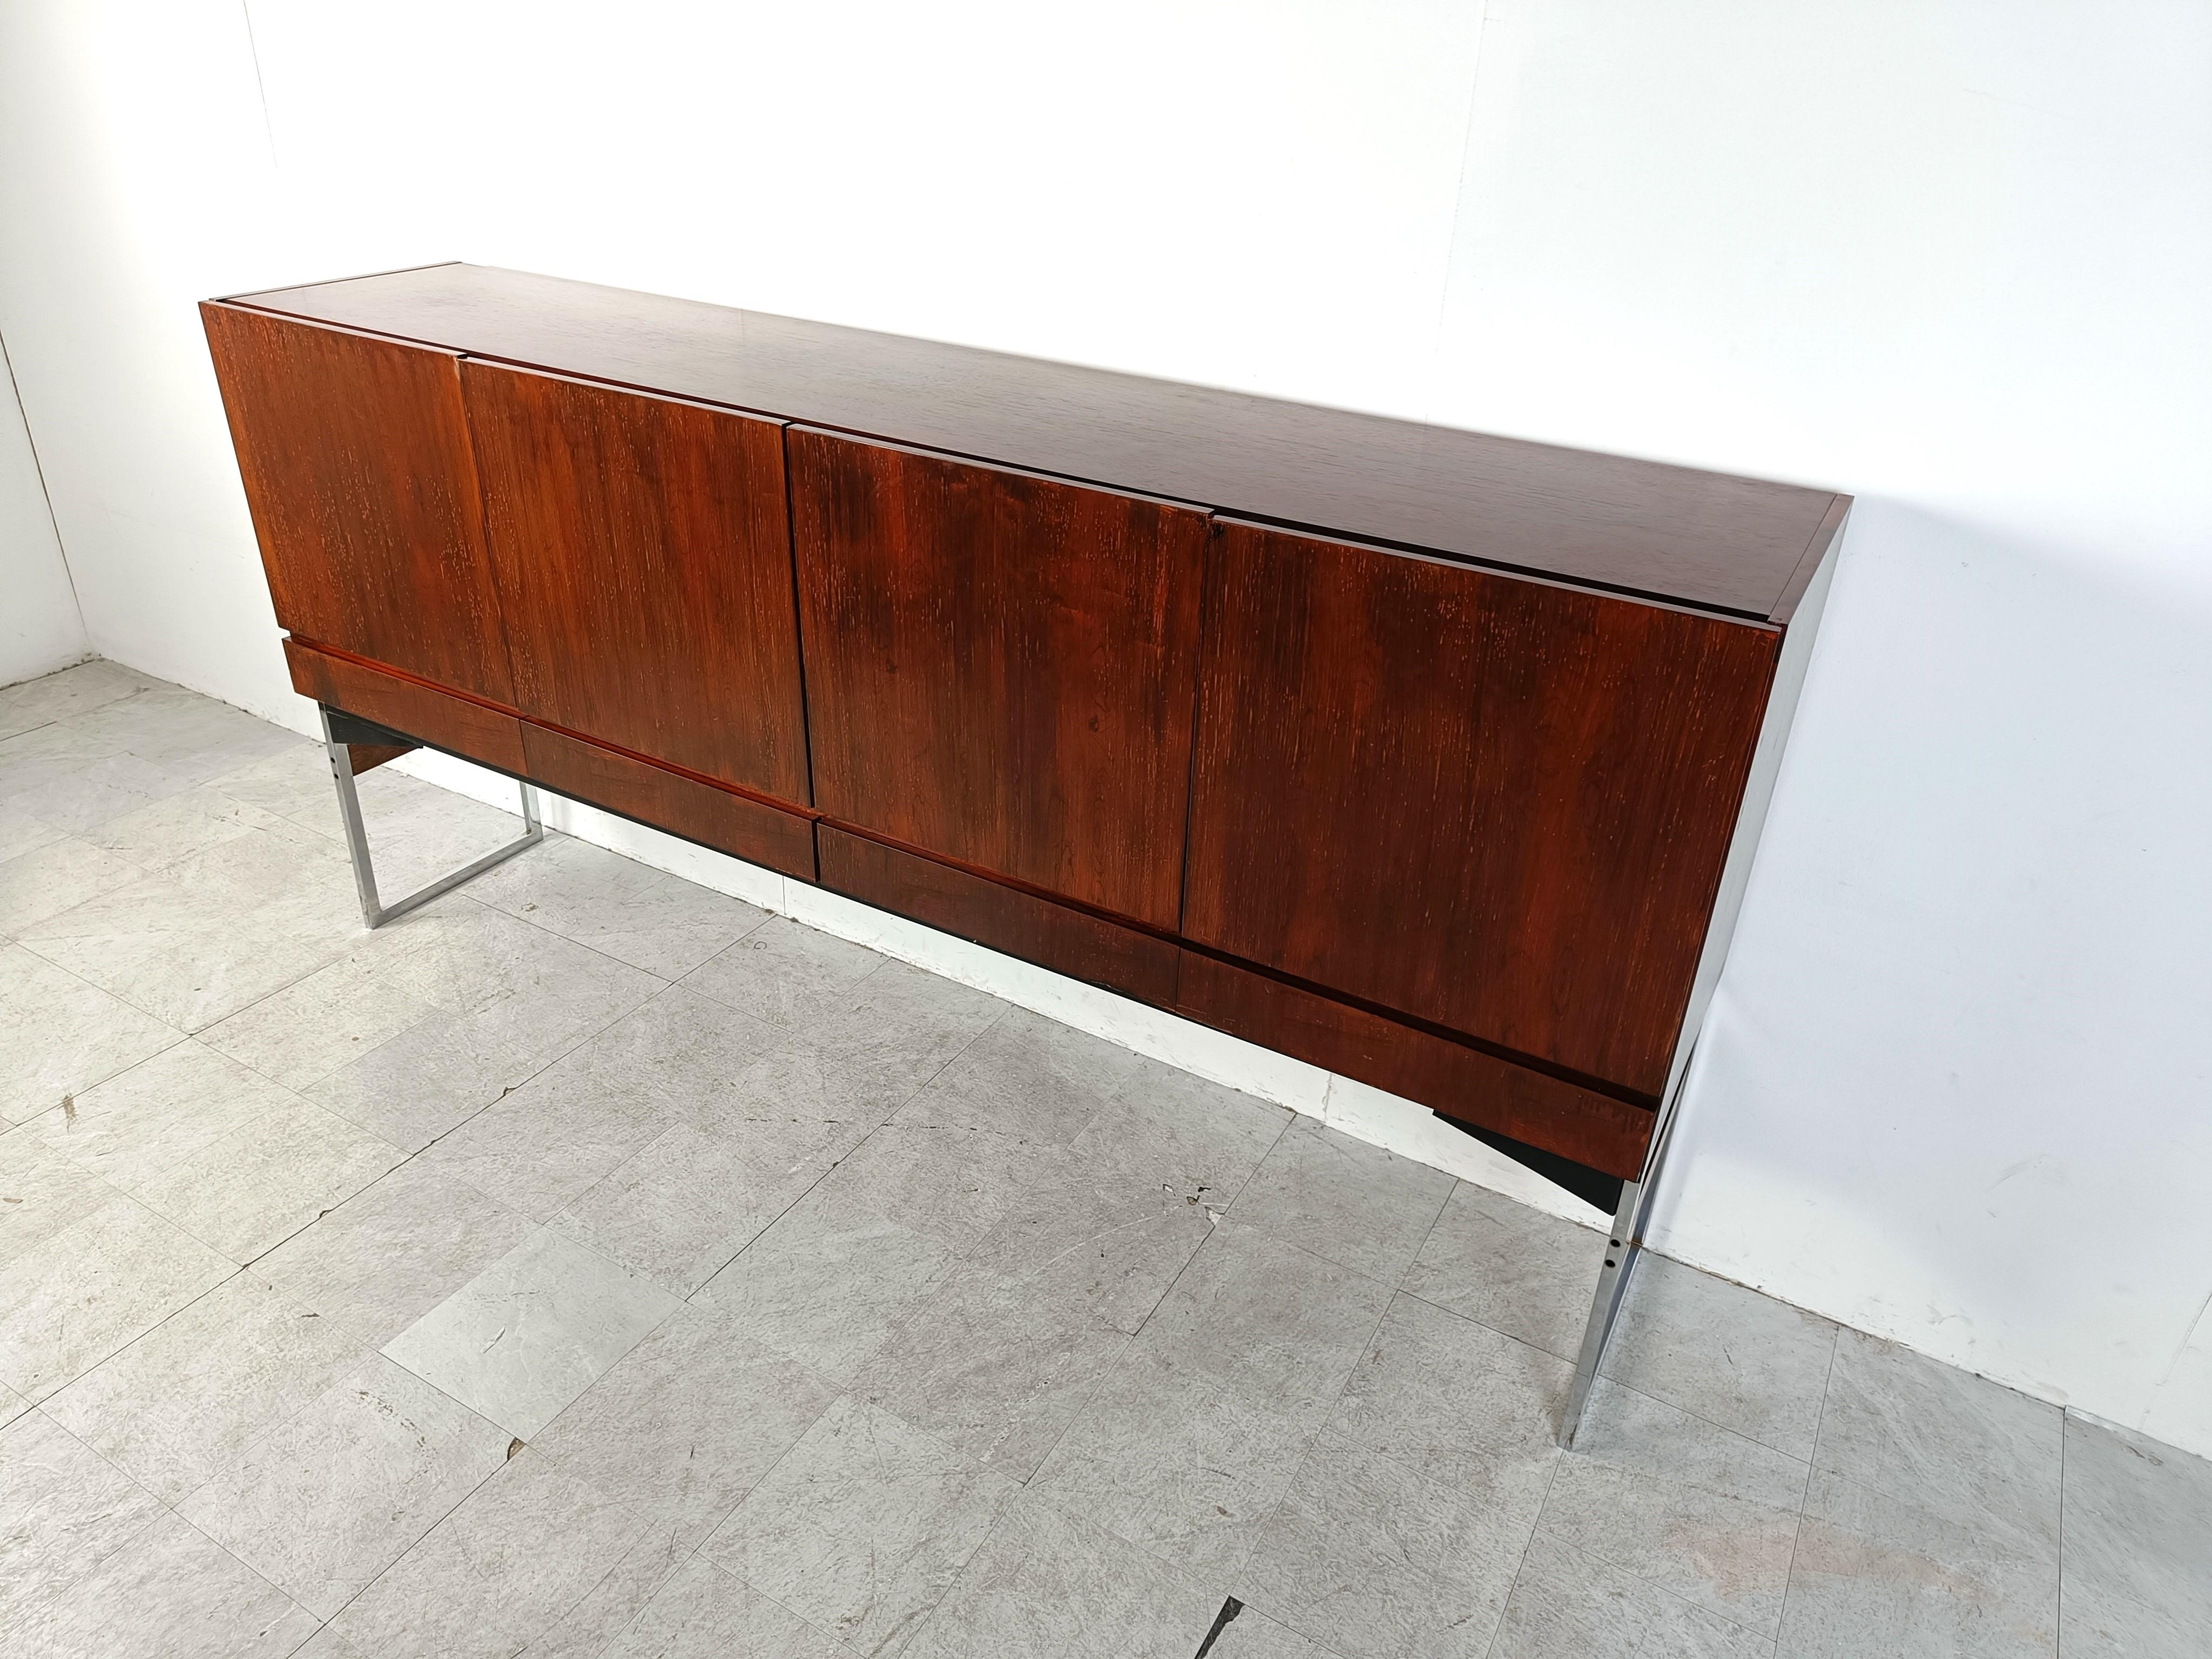 Great looking mid century highboard or sideboard with beautiful veneer wood and a chrome and wooden base.

The sideboard consists of 4 doors and 4 drawers providing loads of storage space.

Very much in the style of Rudolf Glatzel's design, this